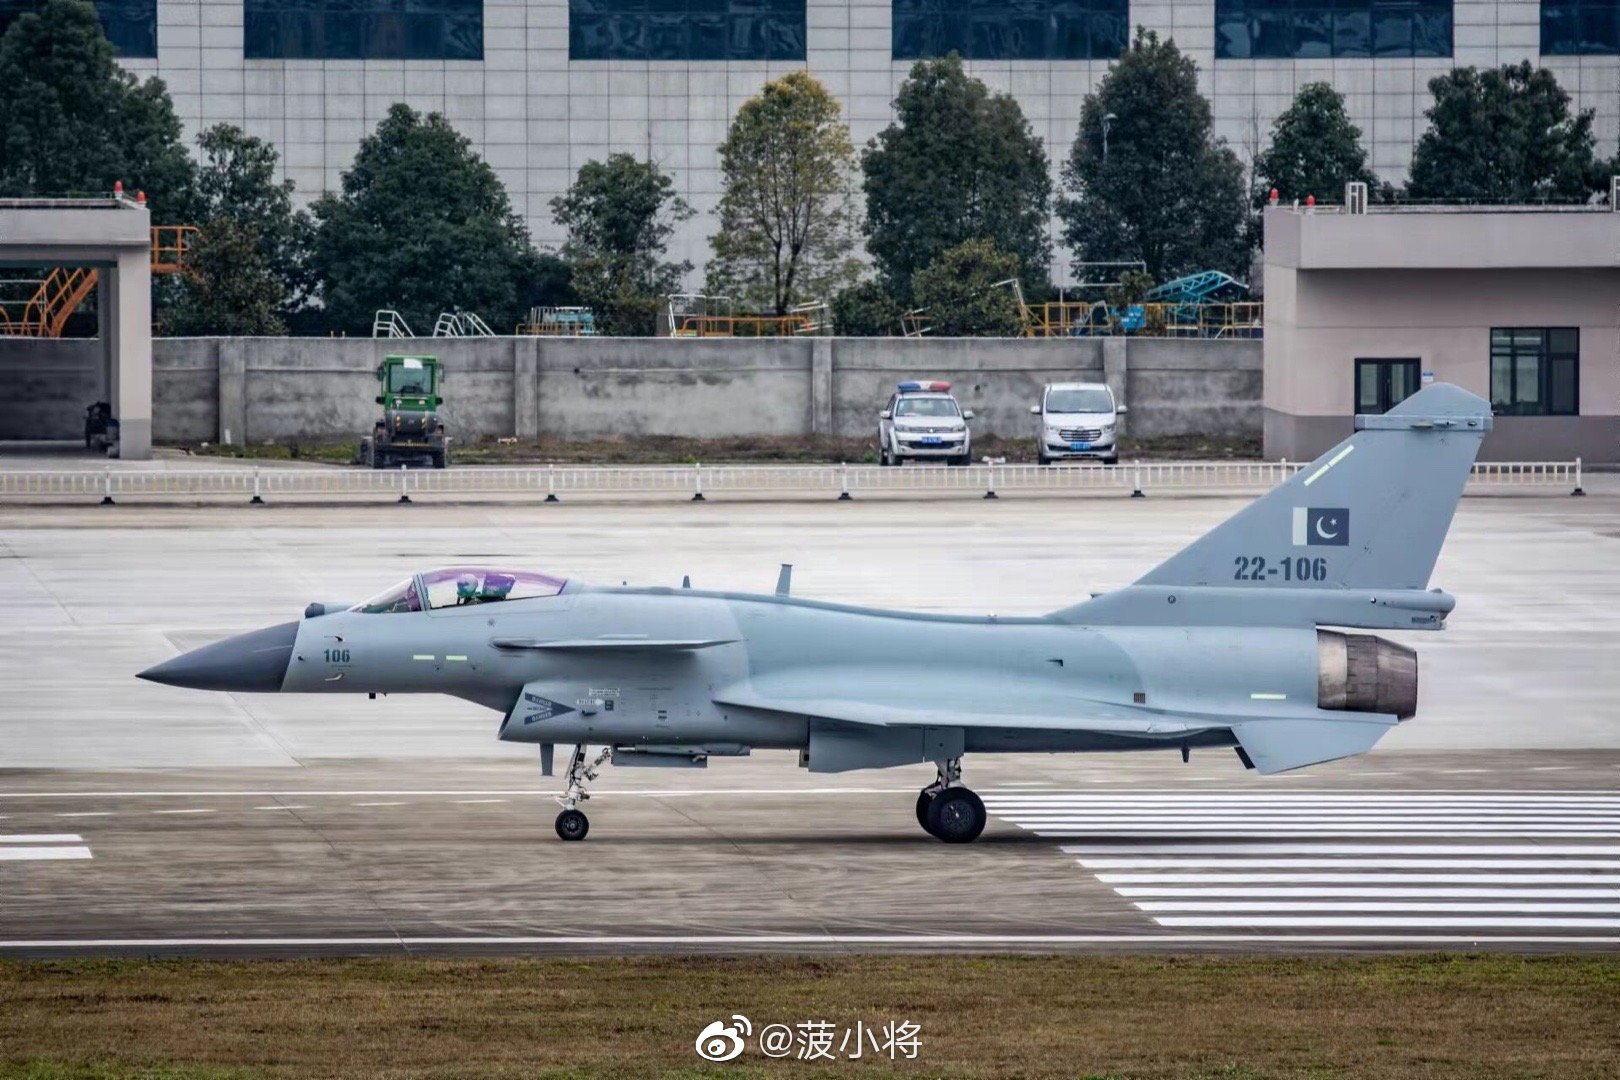 Rupprecht_A on Twitter: "So far the best images of a Pakistani Dragon: ? J-10CP - even as it seems, they are still designated J-10C only ;-) - serial number 22-106! (Image via